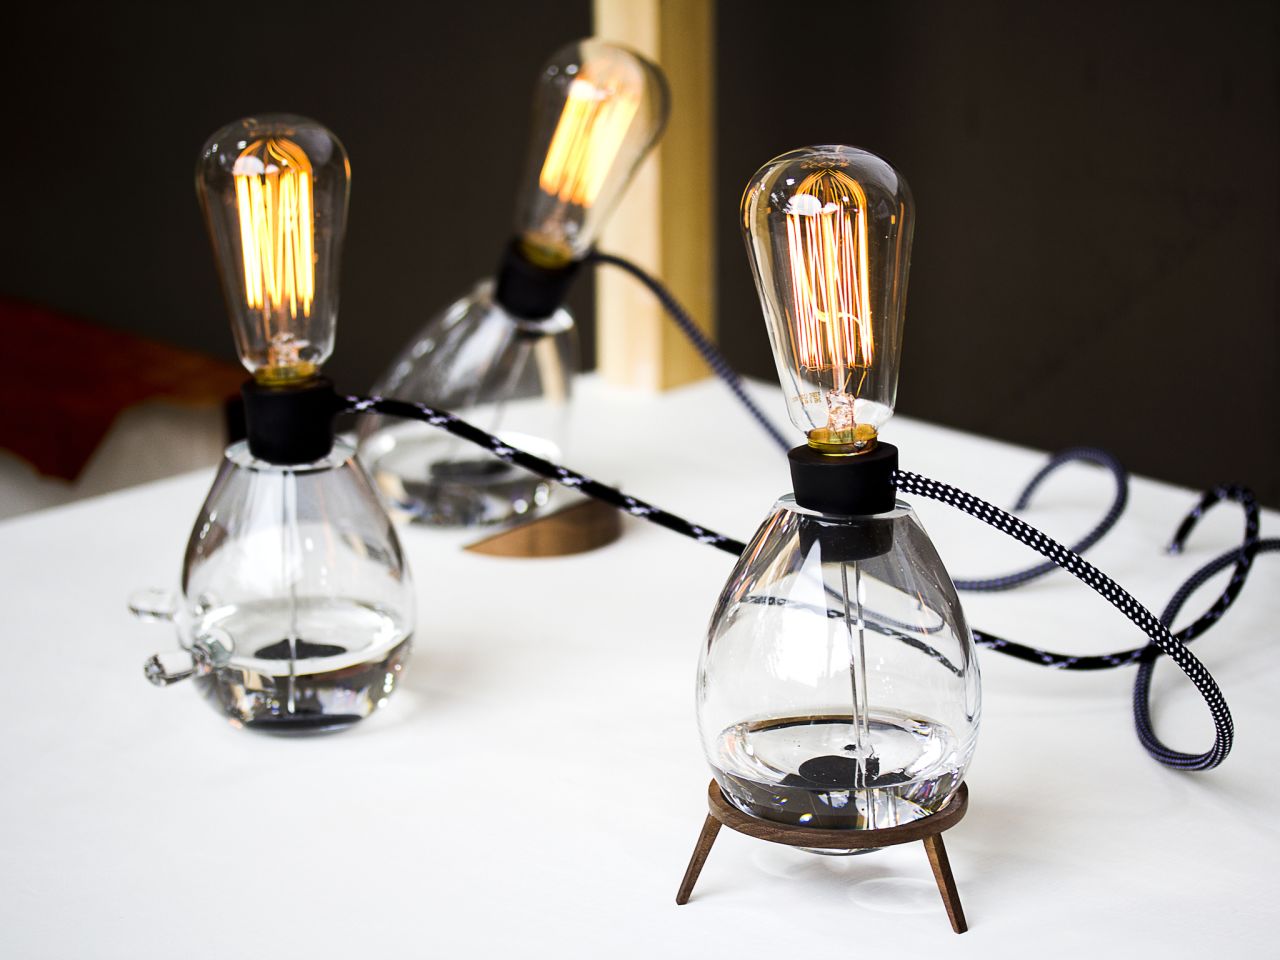 Designer Patrick Stevenson-Keating developed a conductive paint-powered lamp for the 2012 Milan Furniture Fair. The lamp consists of a layer of liquid paint suspended in oil. When standing vertically two electrodes make contact with the conductive paint sending power to the bulb. By rotating the lamp horizontally, the contact is broken and the light goes off.